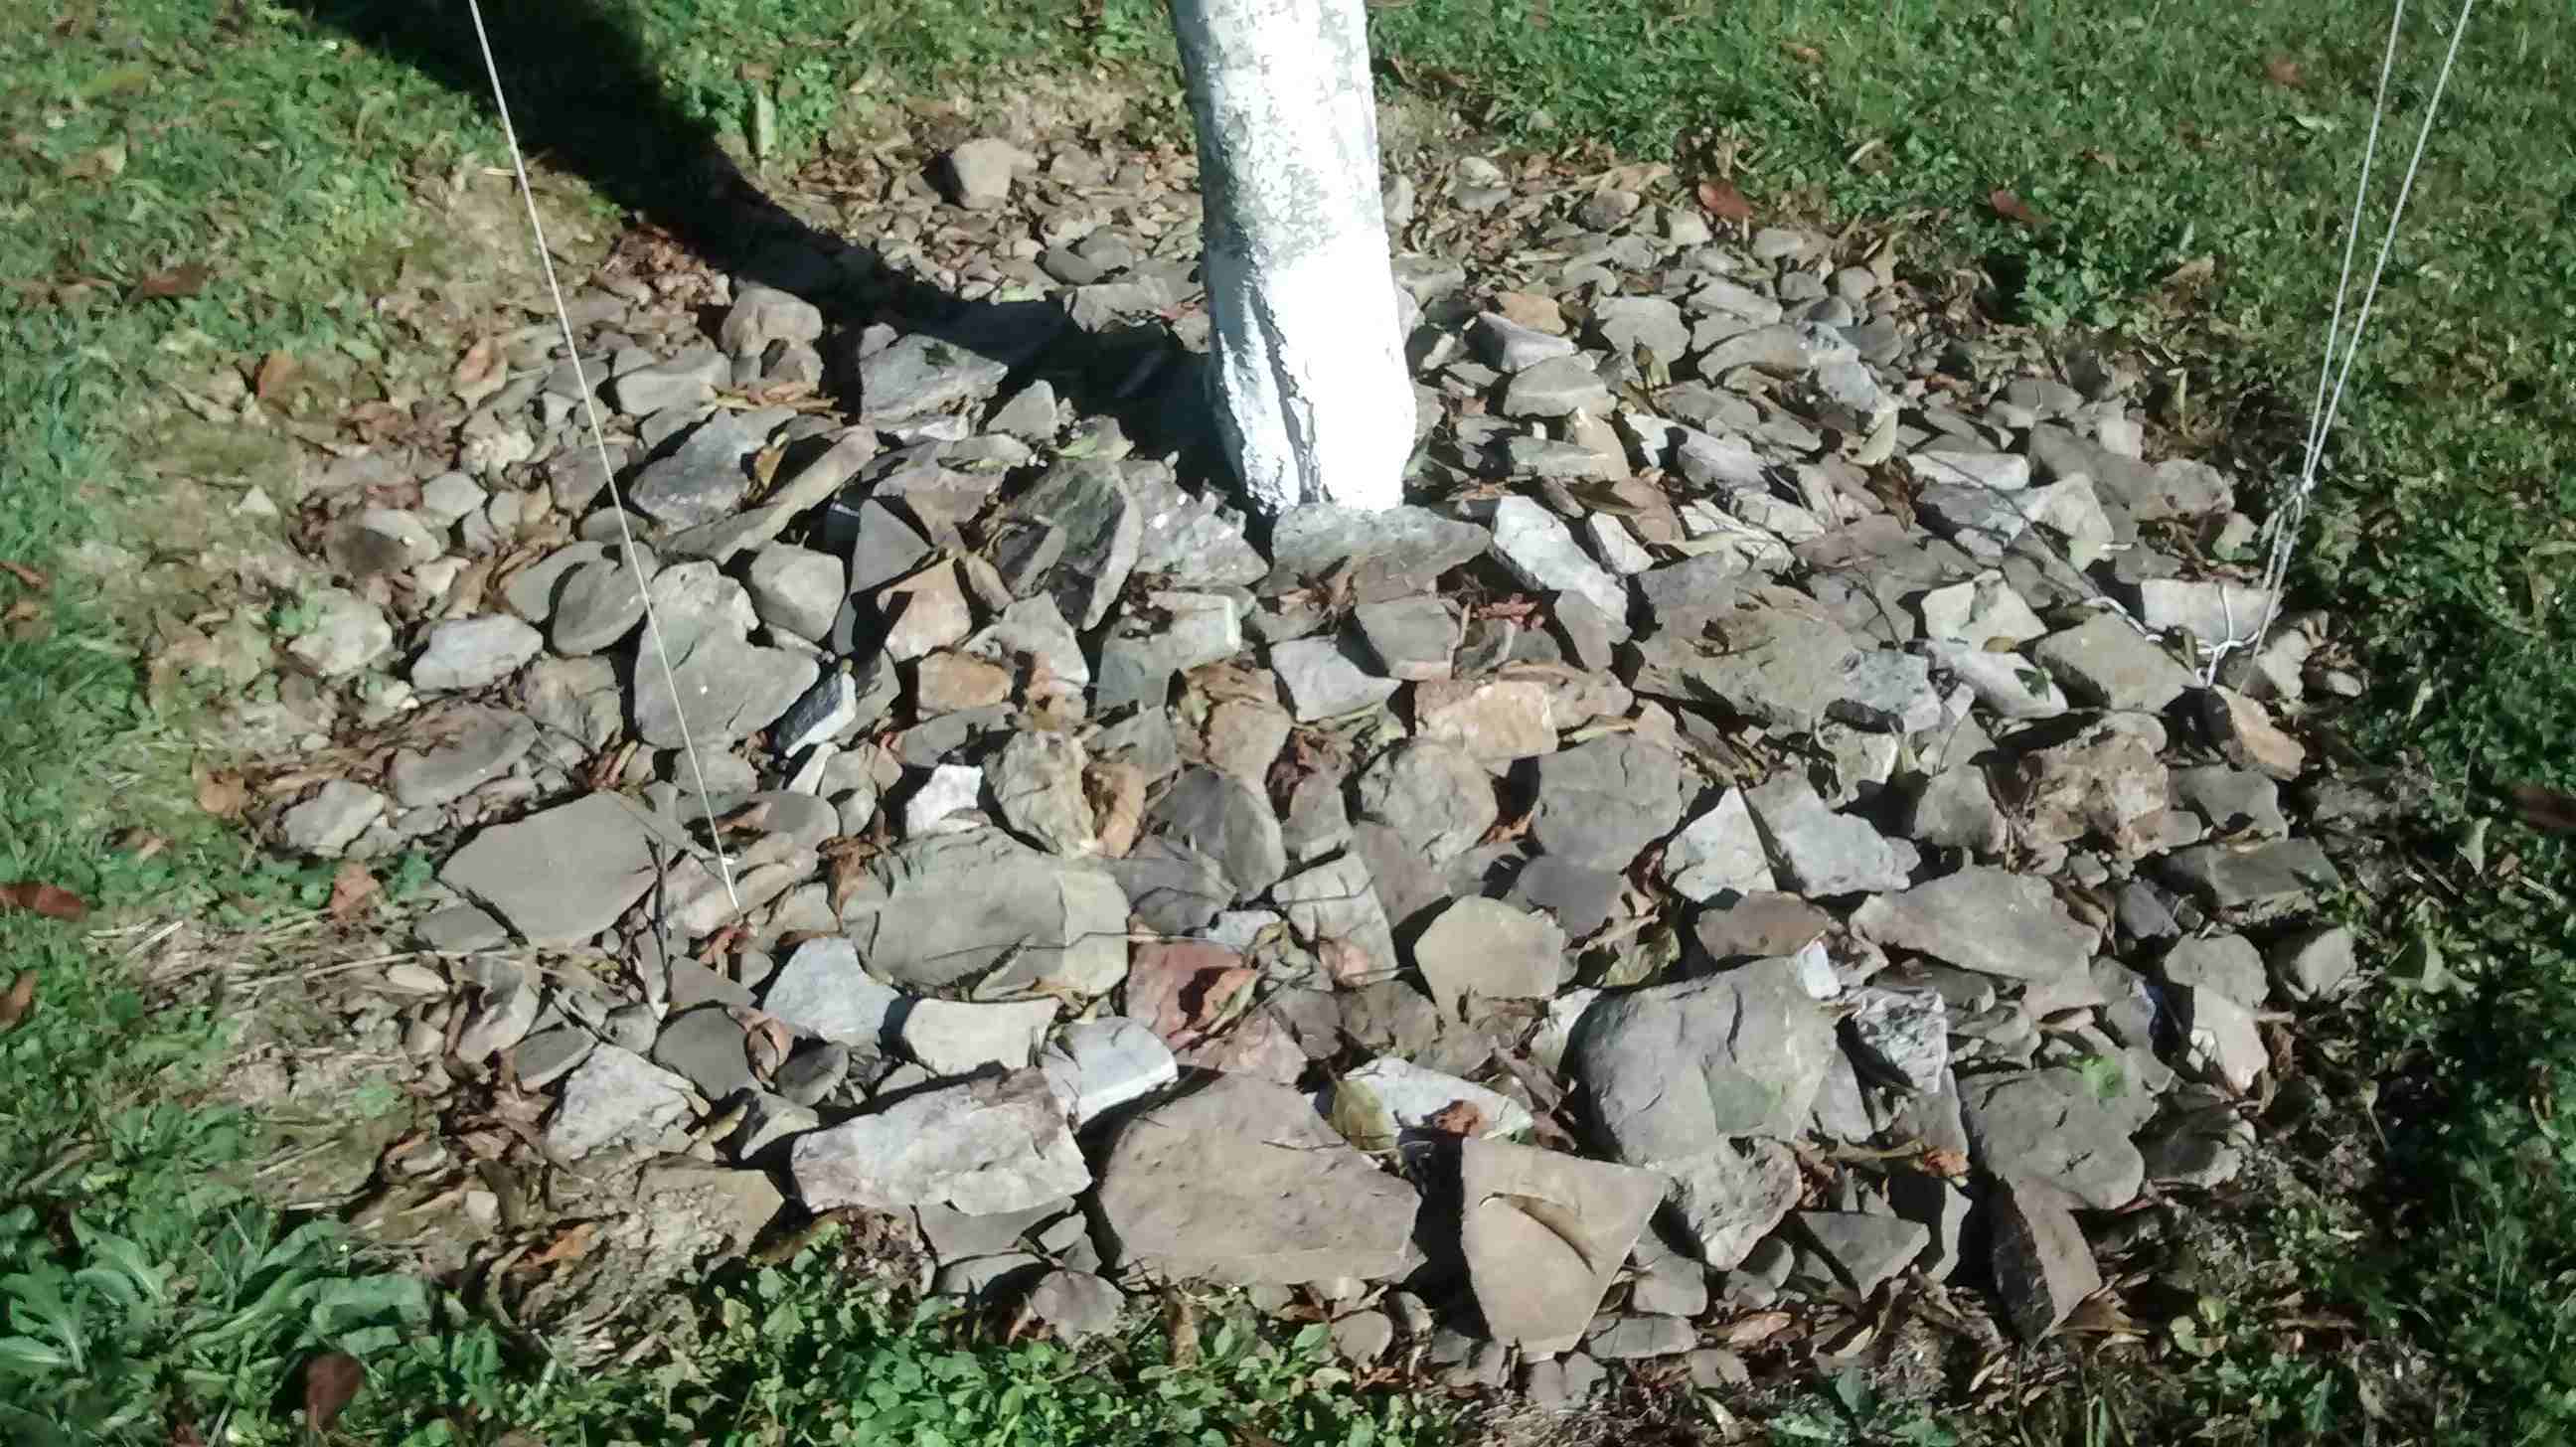 Using Rock As Mulch General Fruit, Is It Bad To Put Rocks Around Trees